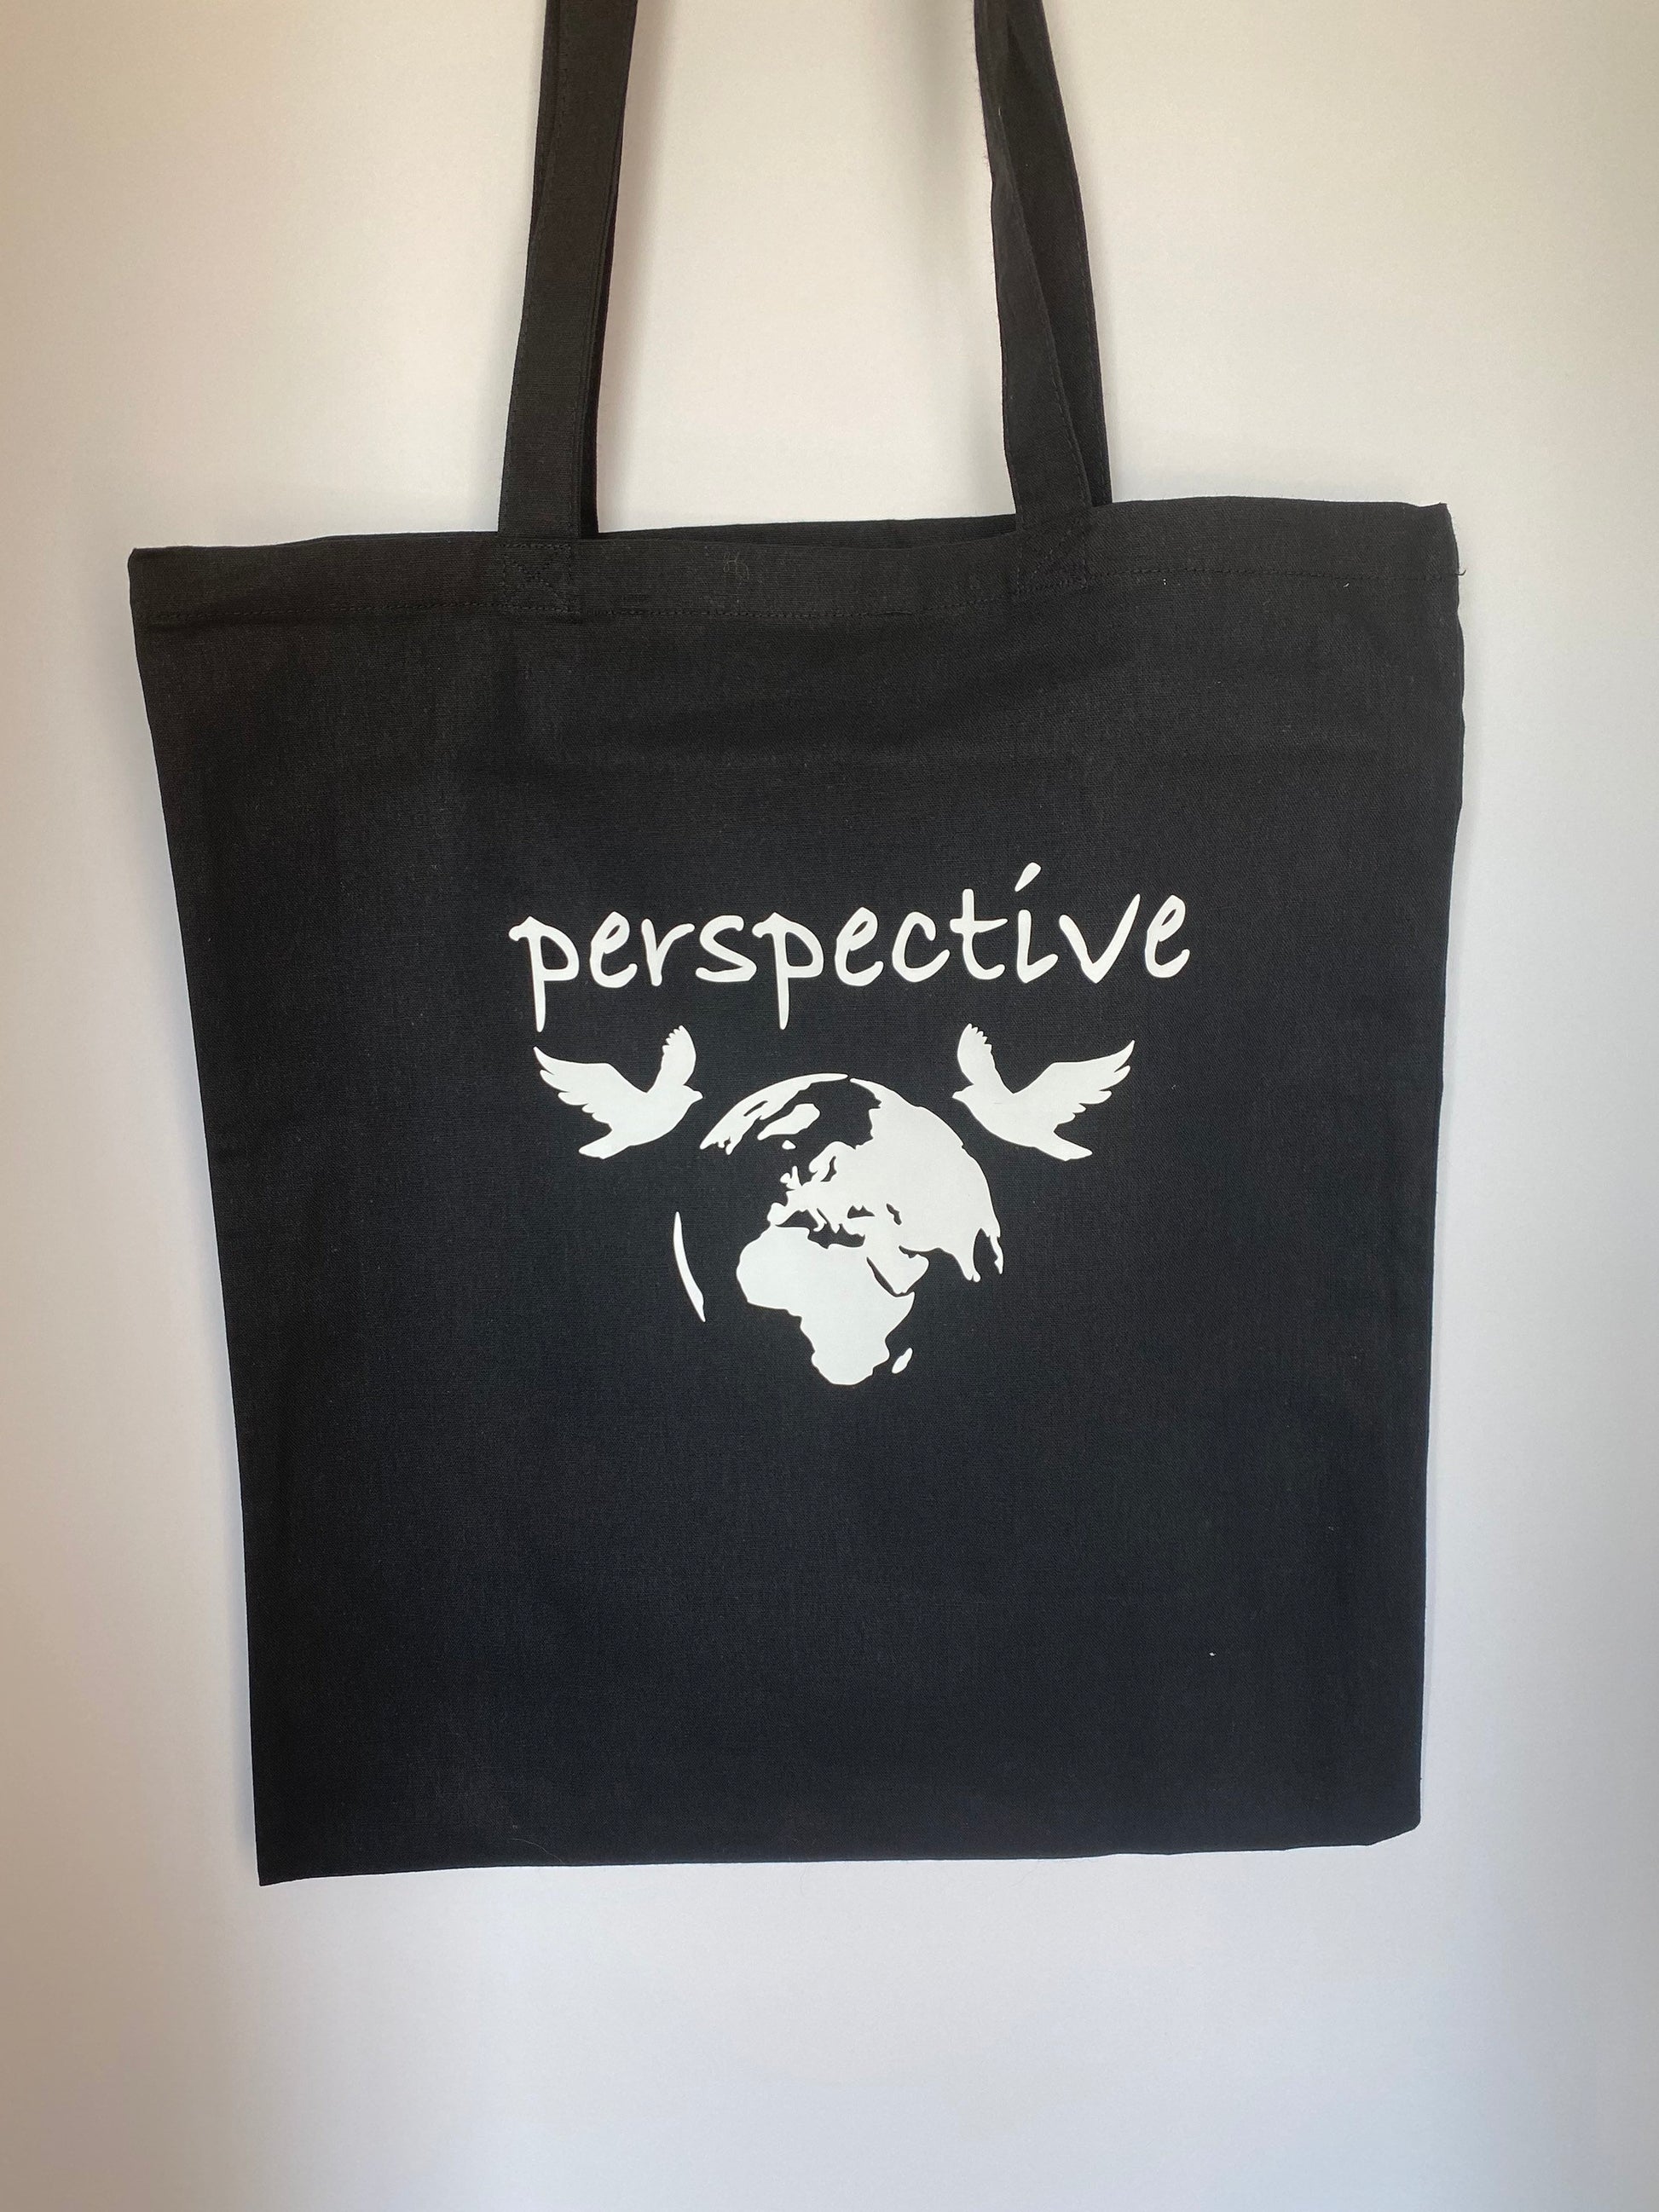 Perspective T-shirt, Tank, Hoodie or Tote, Peace t-shirt, Inspirational Message, Minimalist Clothing, Black and White